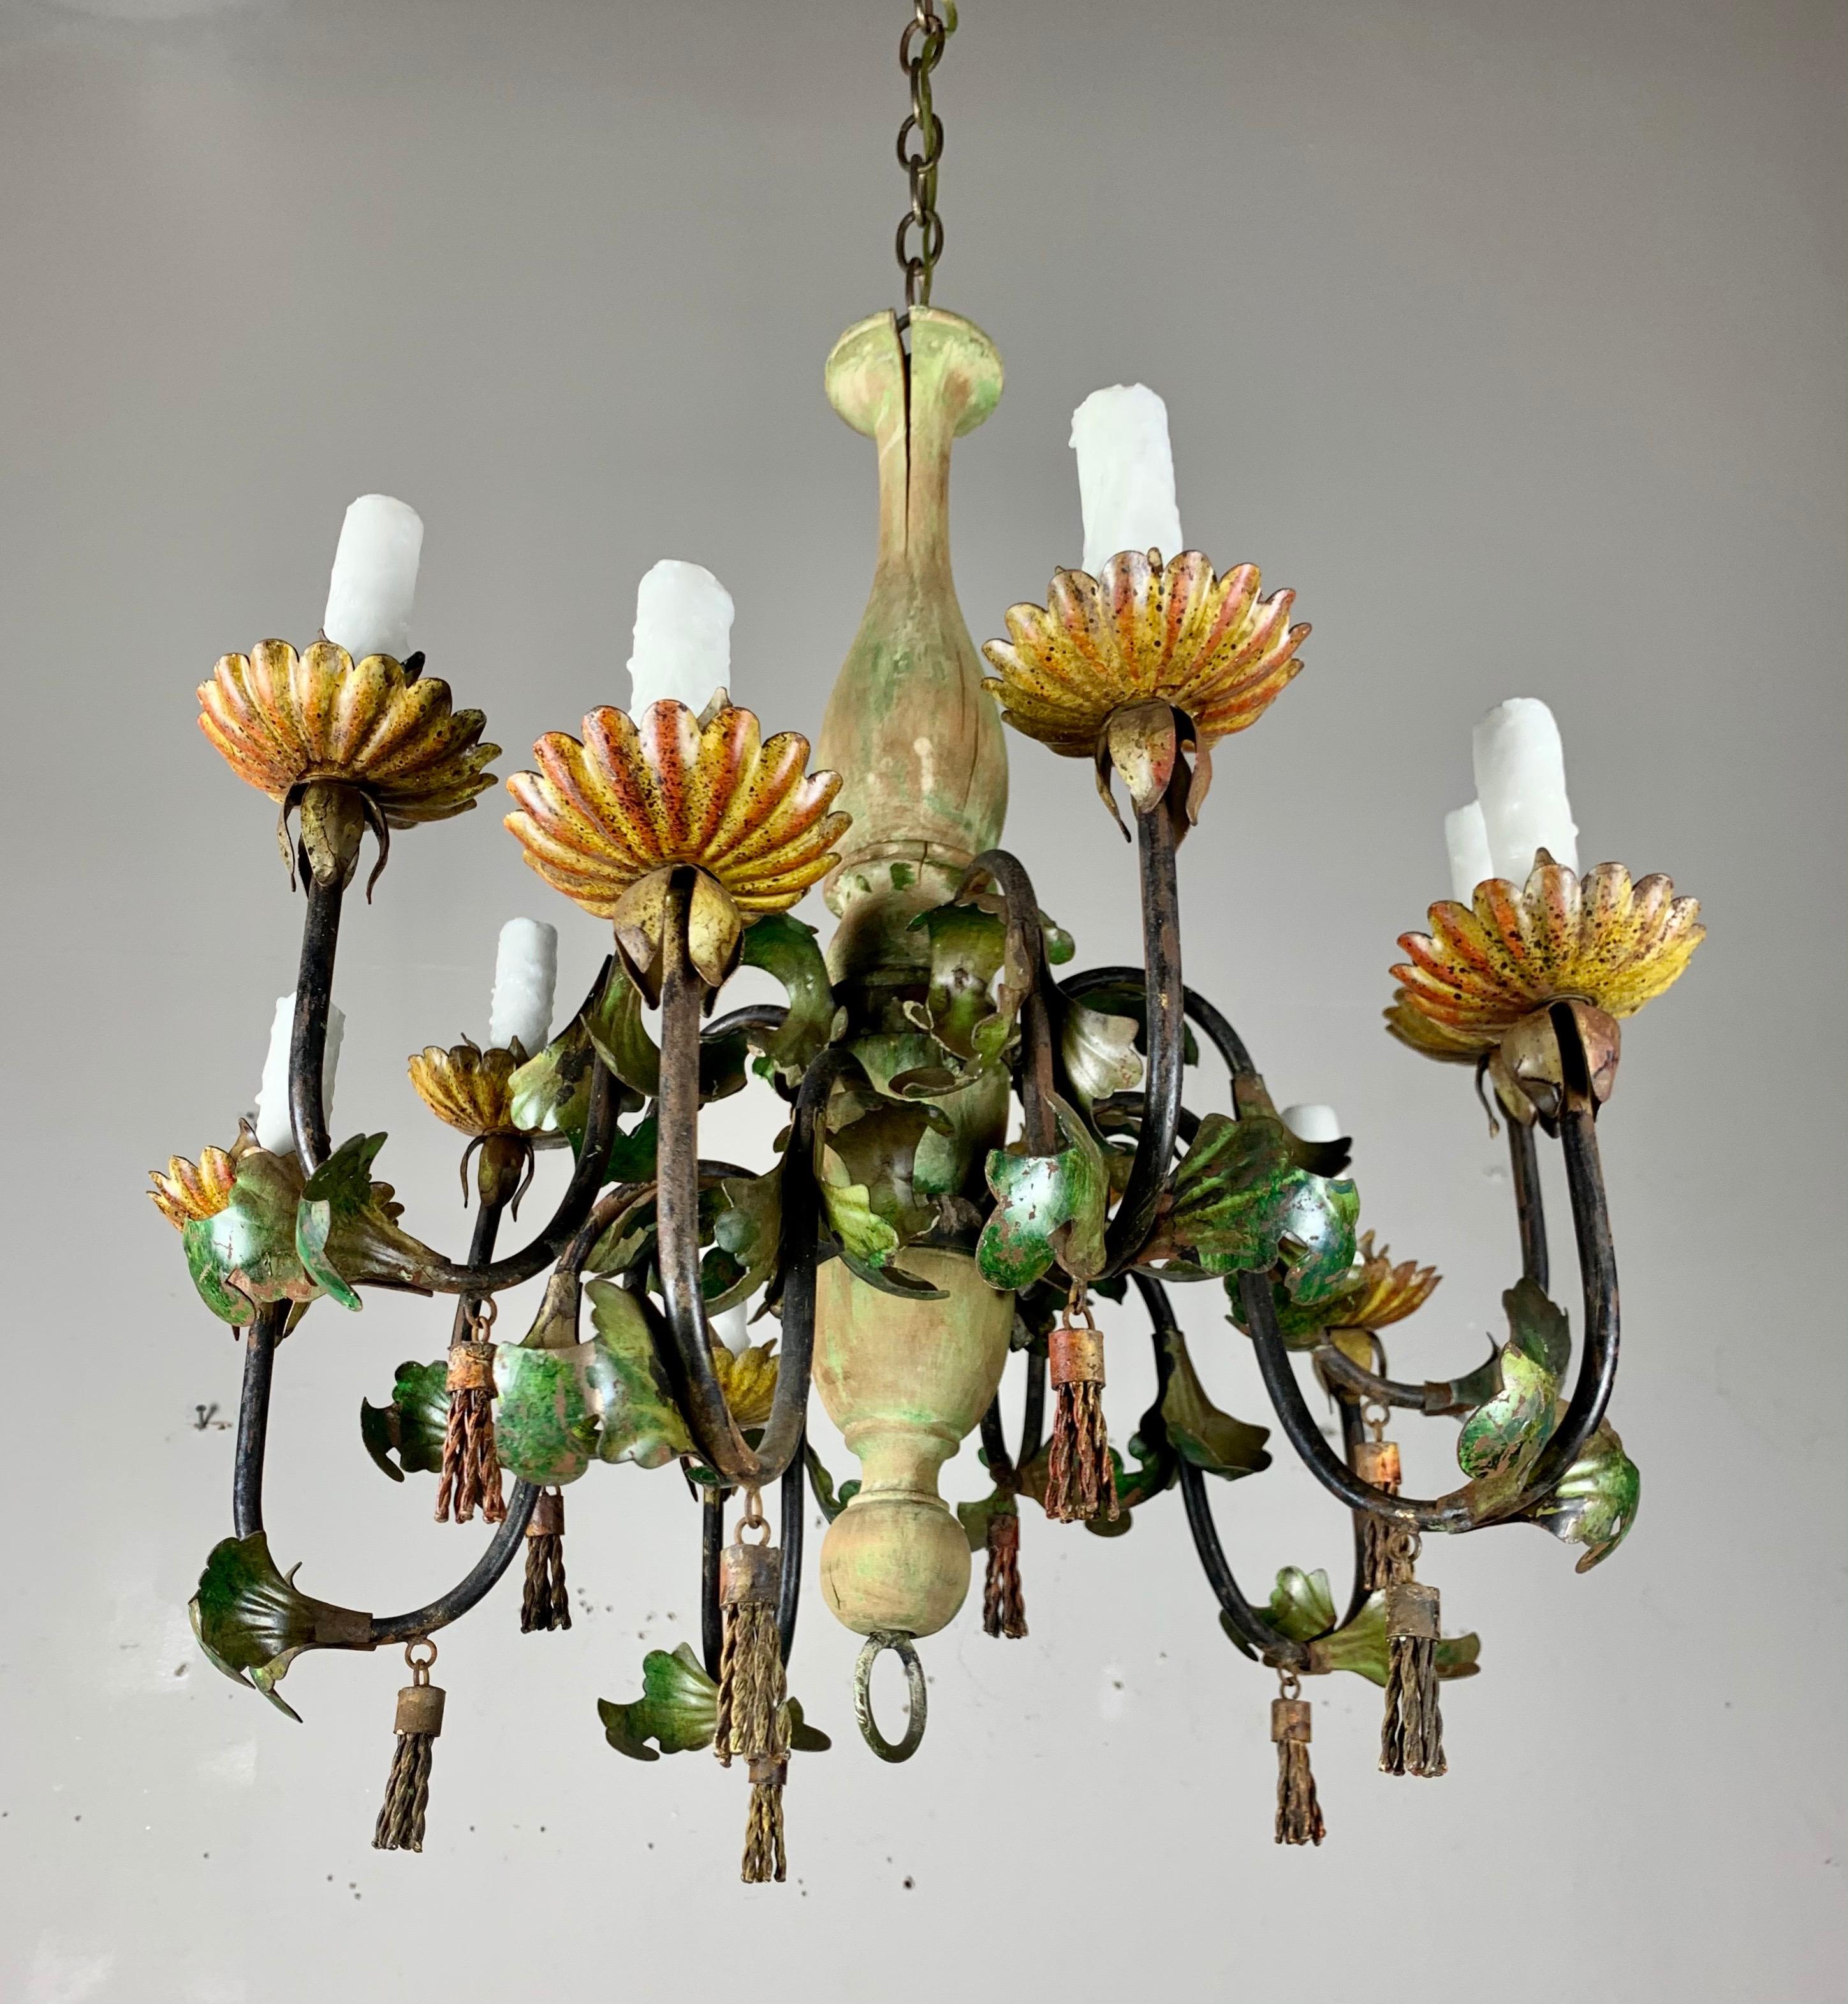 Hand-Painted Italian Painted Wood and Iron Chandelier, C. 1940